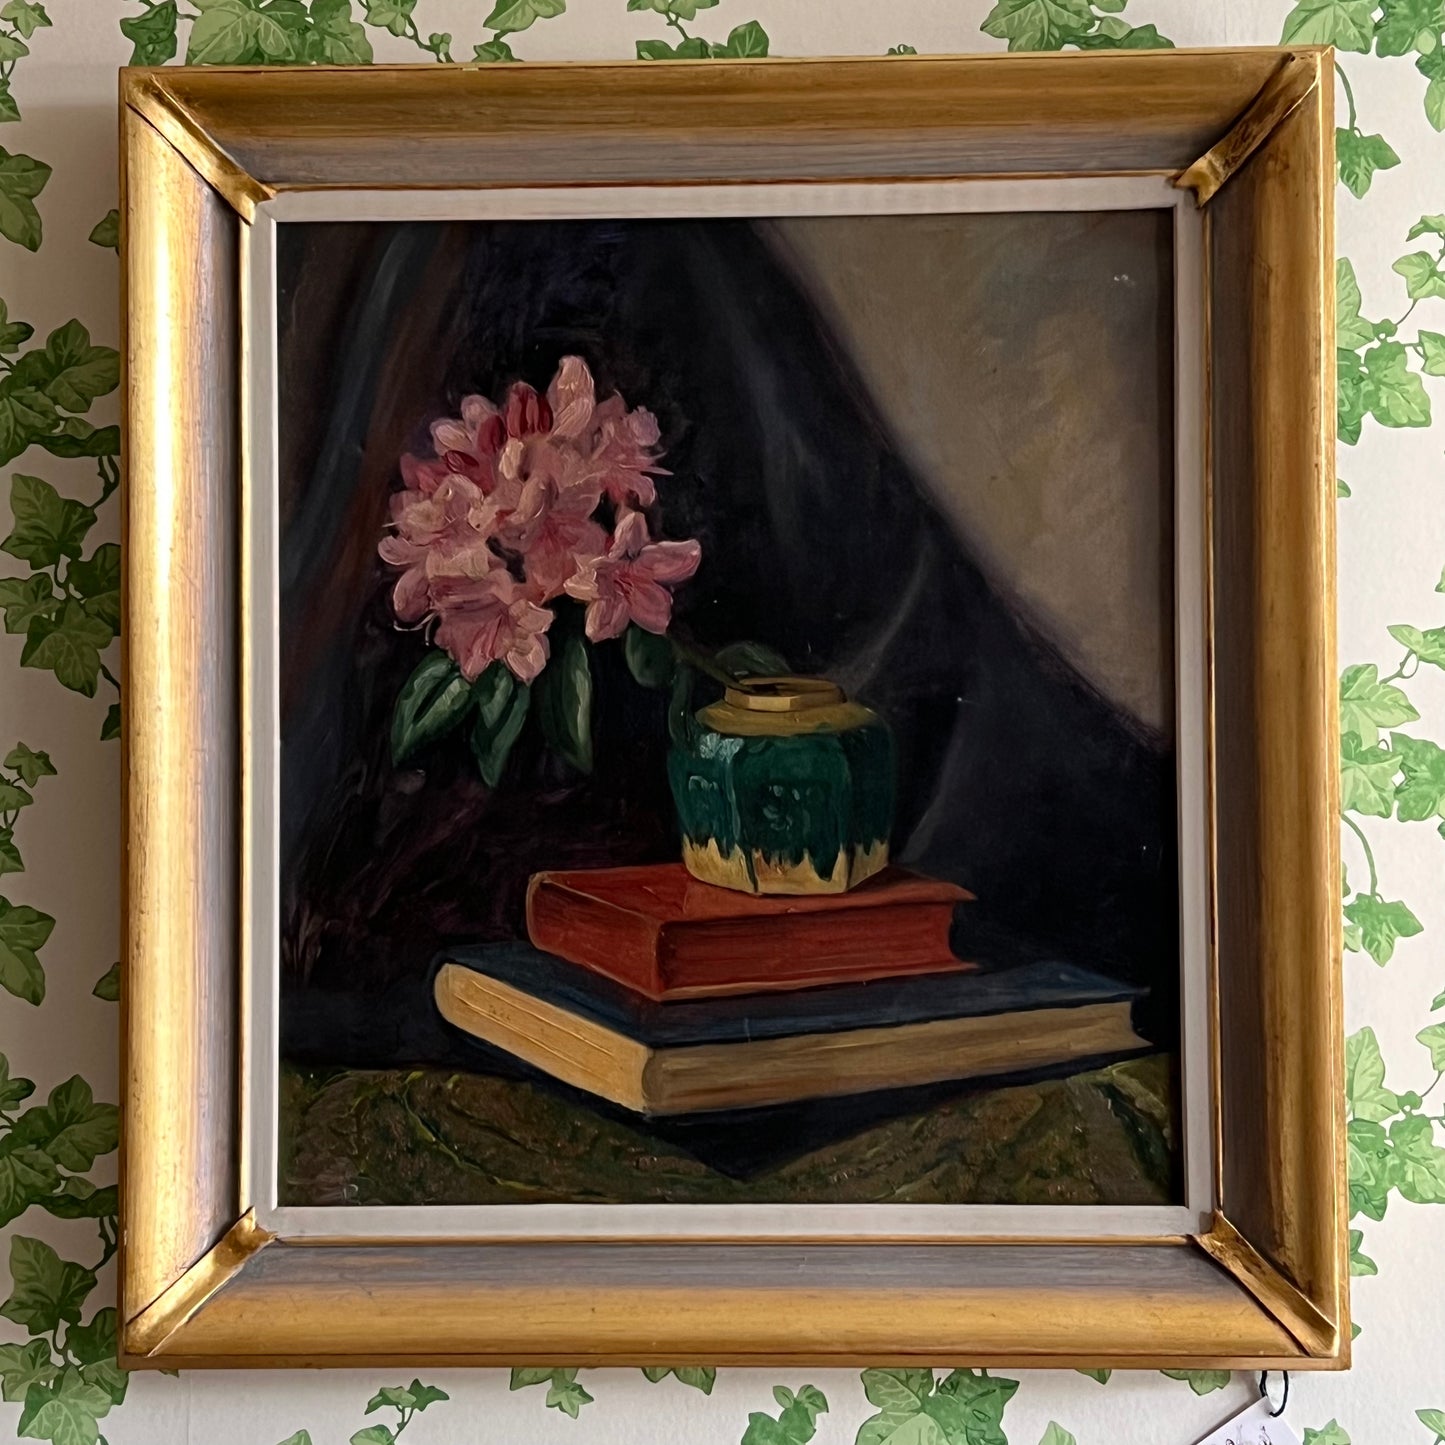 Vintage Oil Painting Still Life of Books, Ginger Jar & Rhododendron